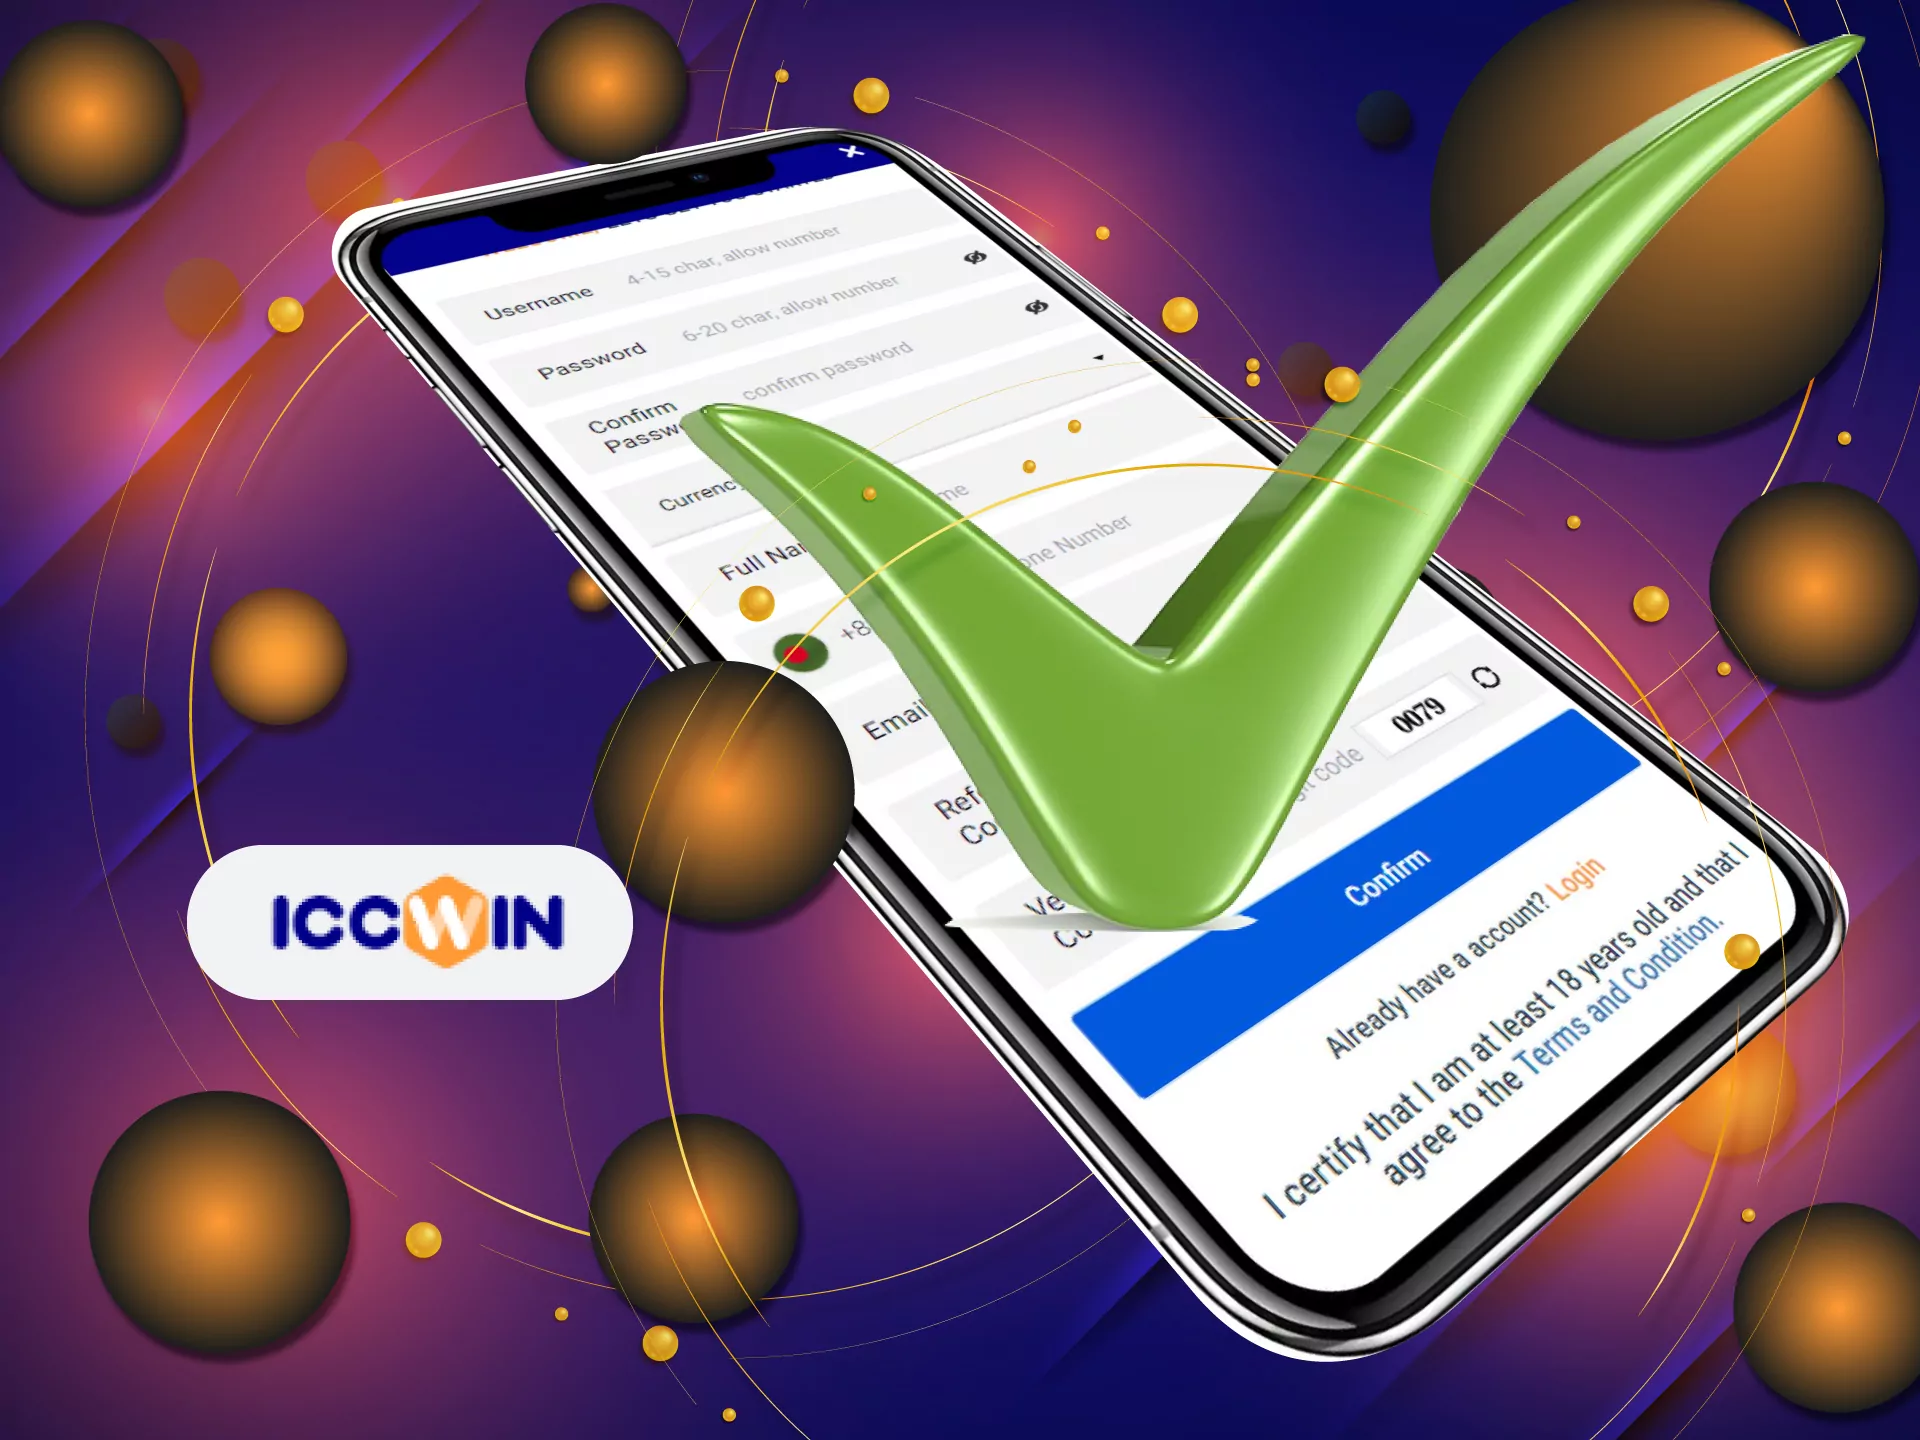 Verify your account to withdraw money from ICCWIN.